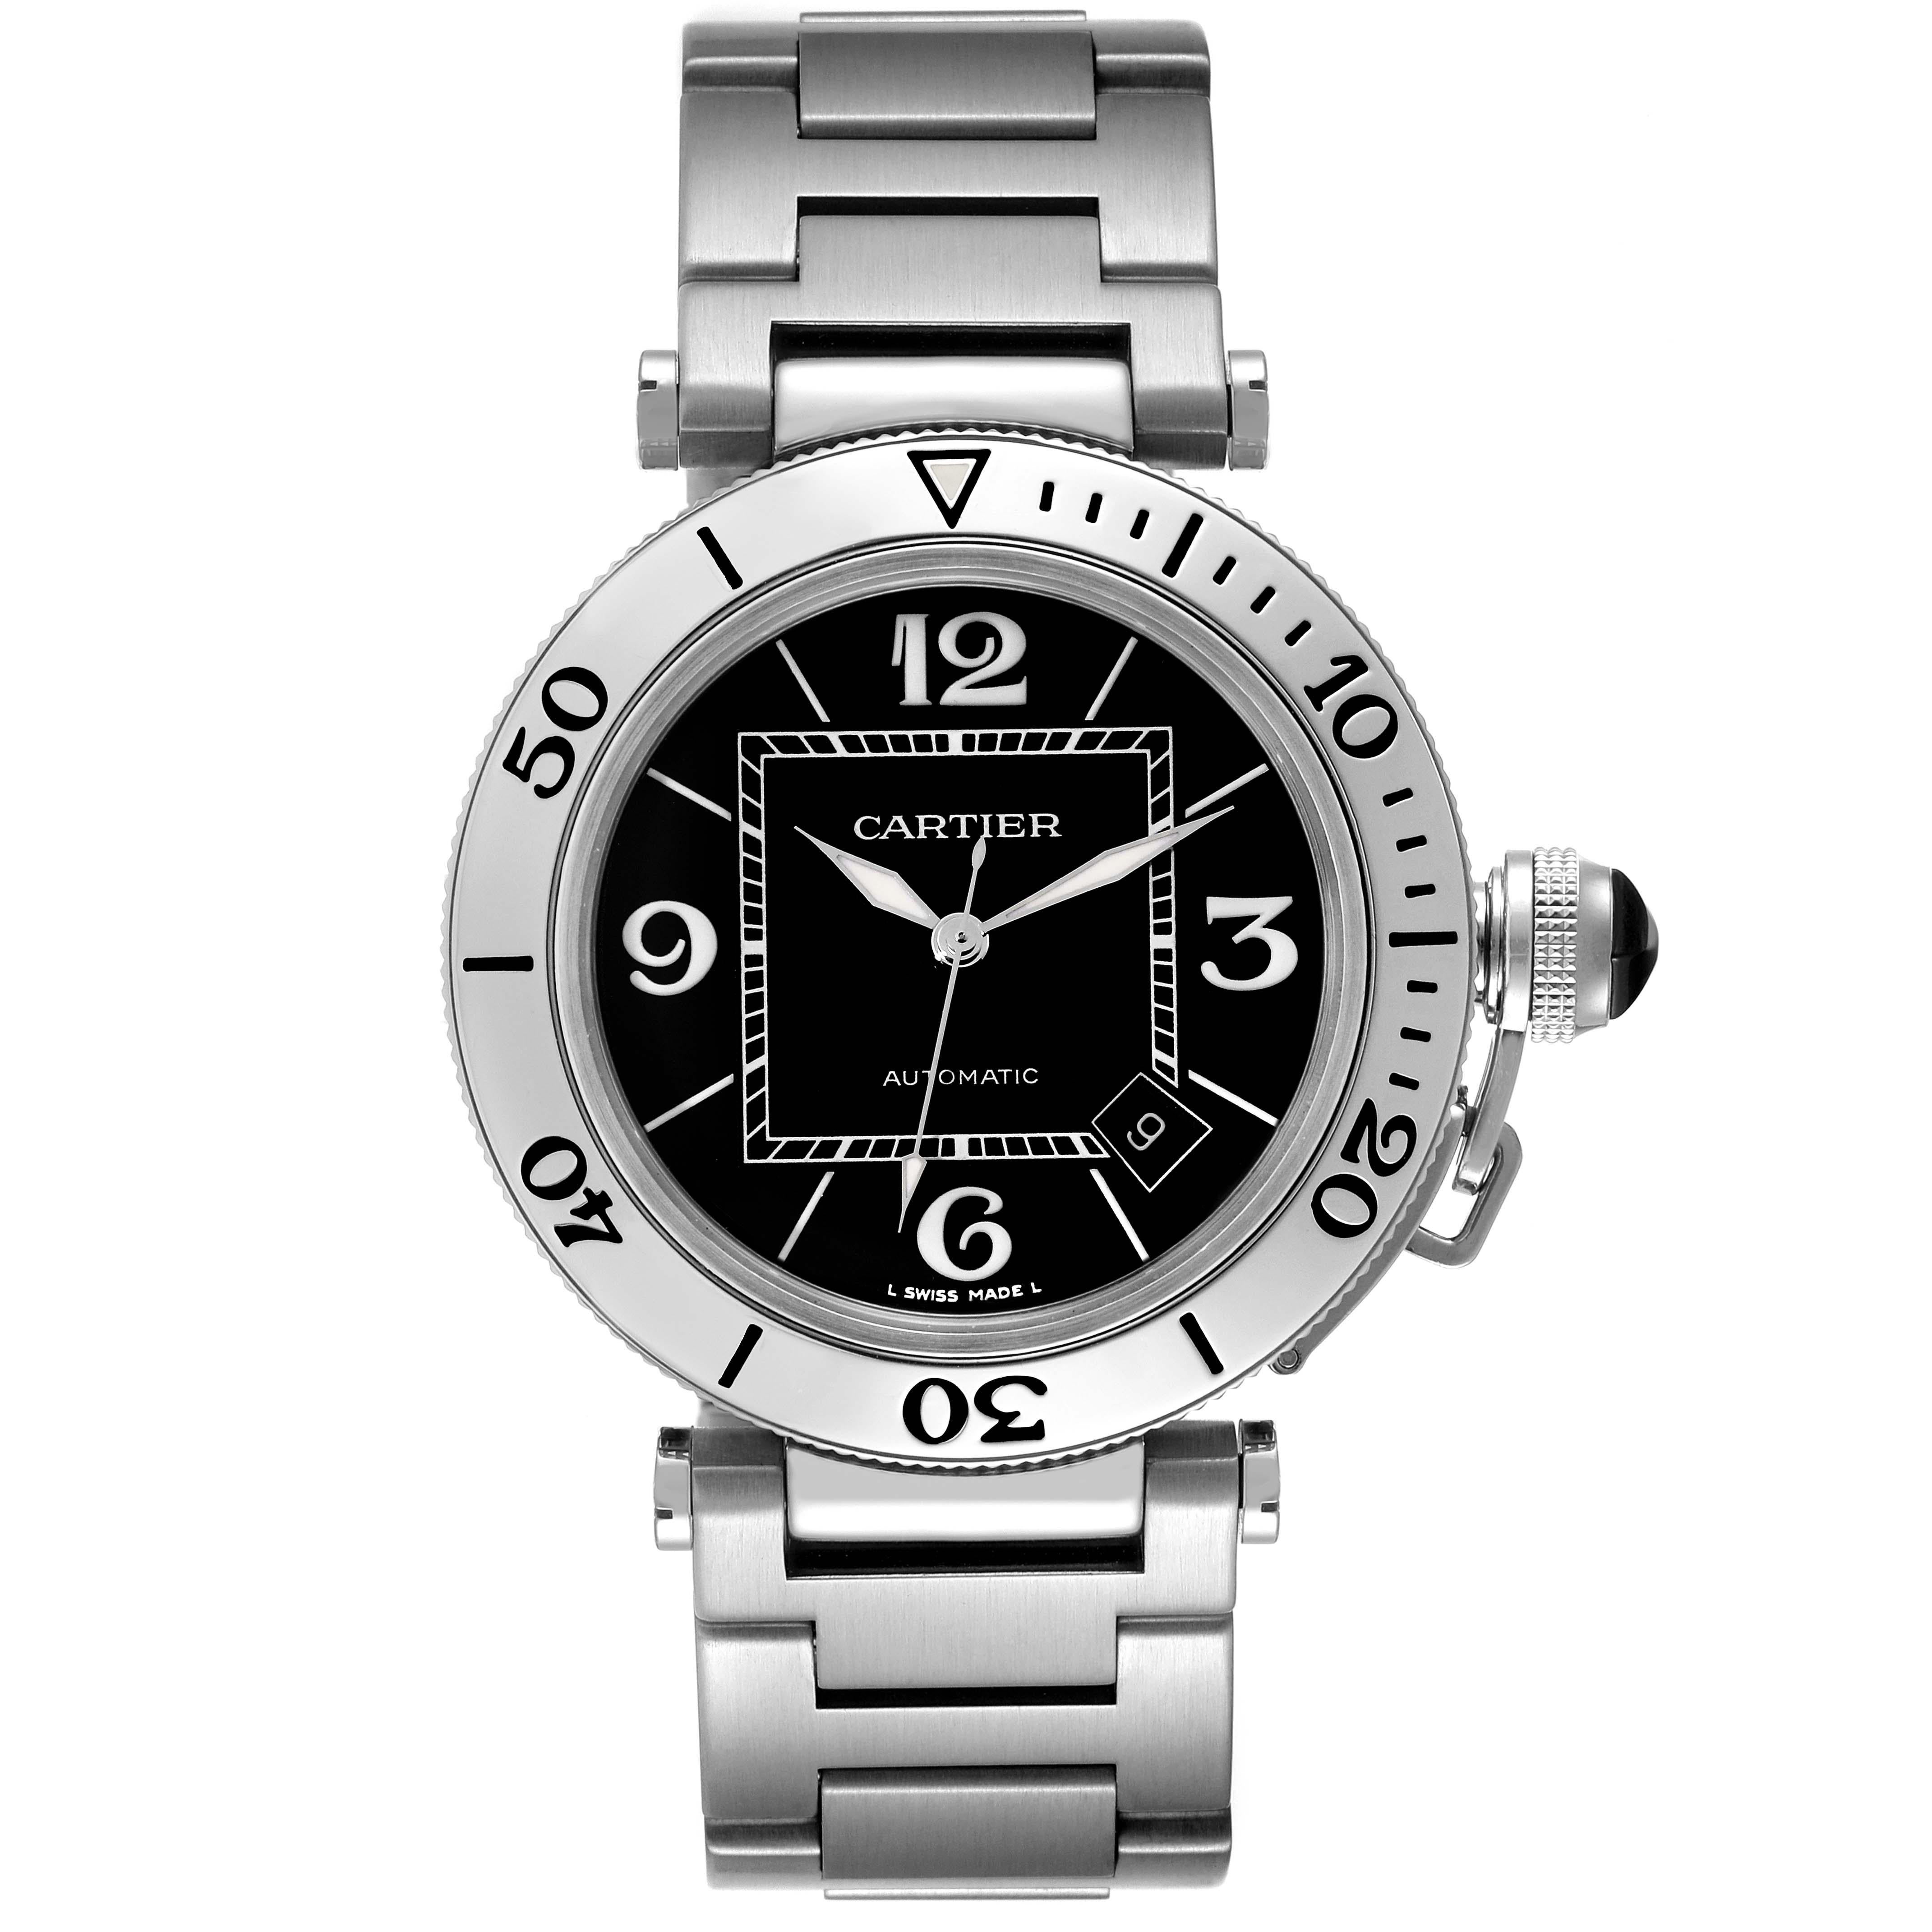 Cartier Pasha Seatimer Black Dial Automatic Steel Mens Watch W31077M7. Automatic self-winding movement. Round stainless steel case 40.5 mm in diameter. Includes a screw down crown cover with a faceted black ceramic cabochon. Unidirectional rotating